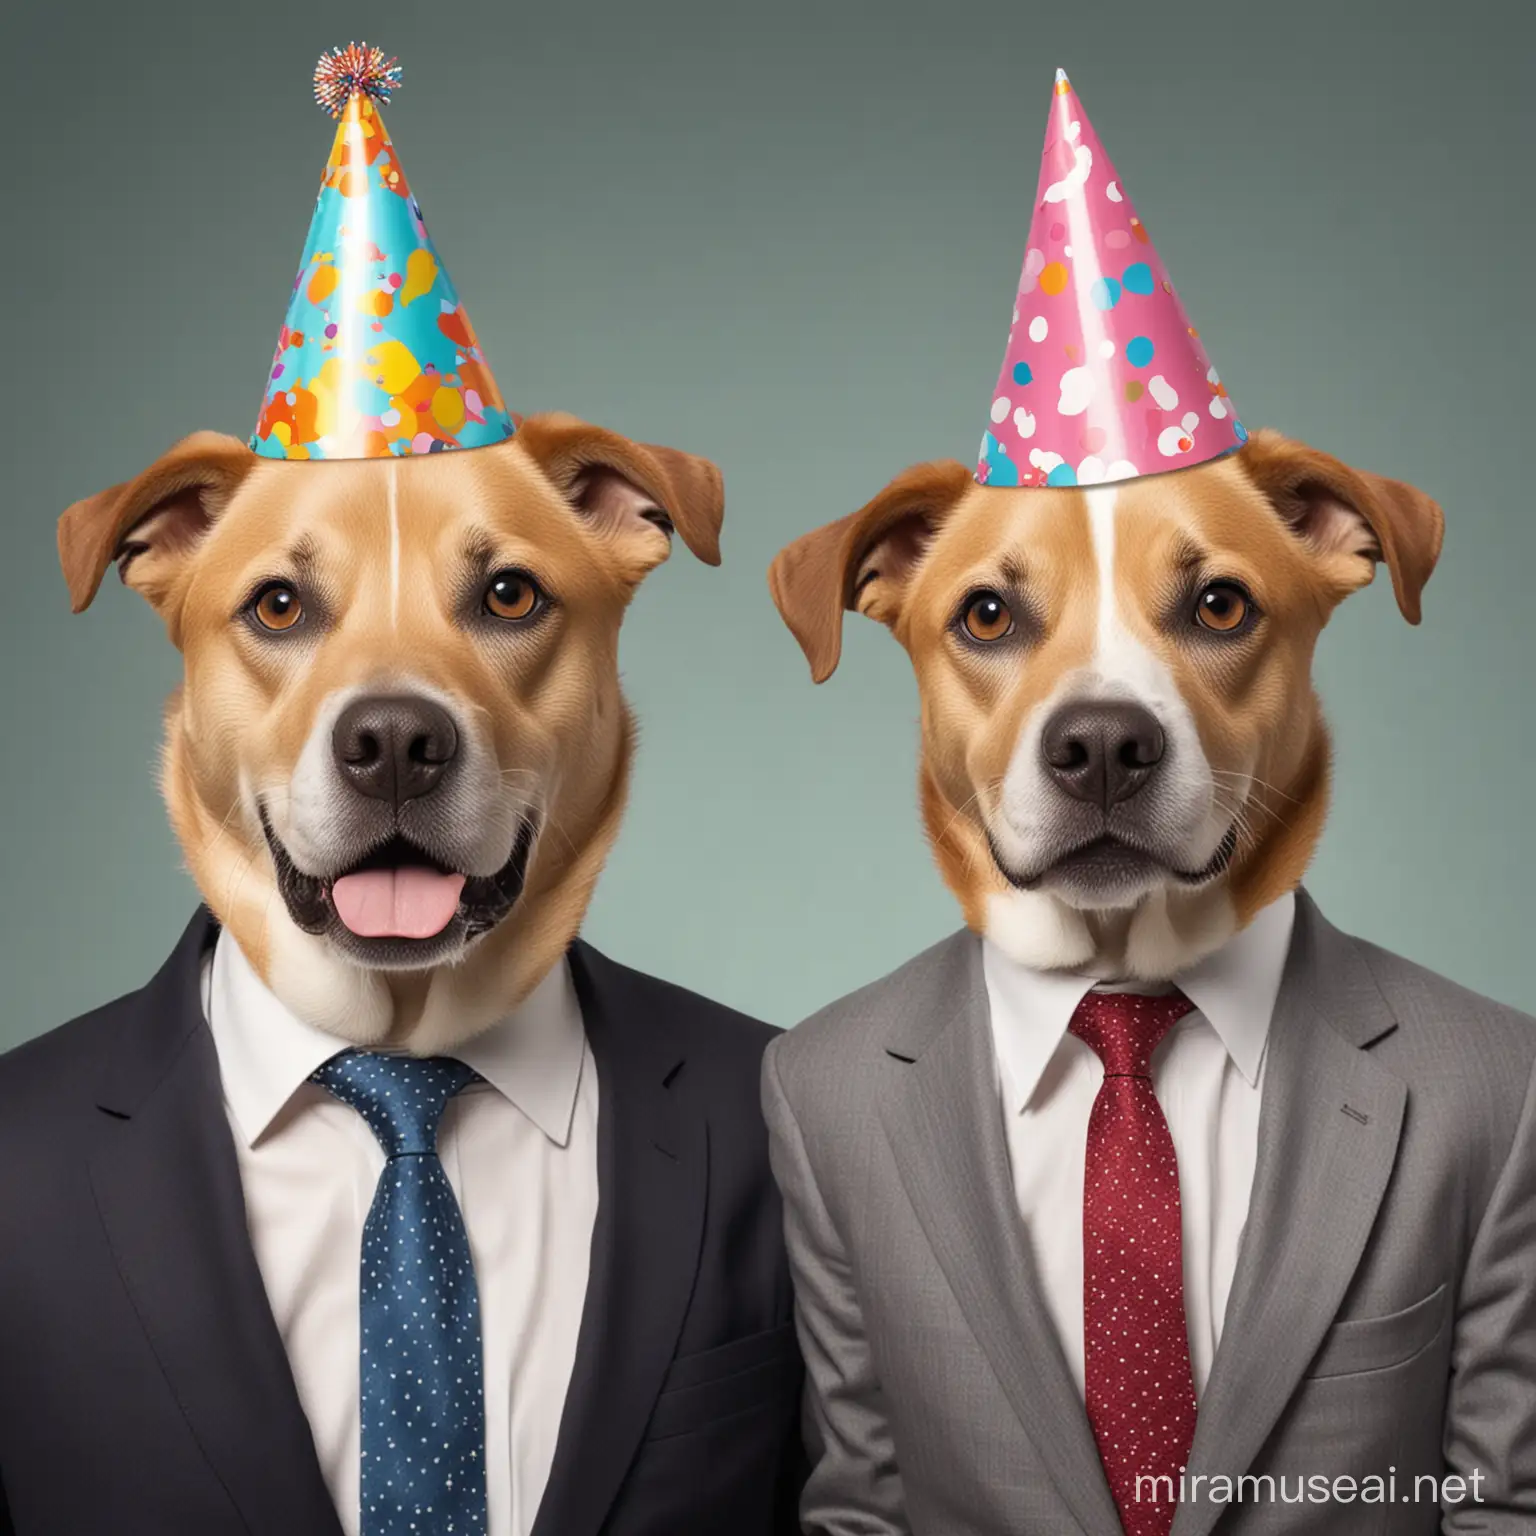 Dogs in Festive Attire Celebrating with Party Hats